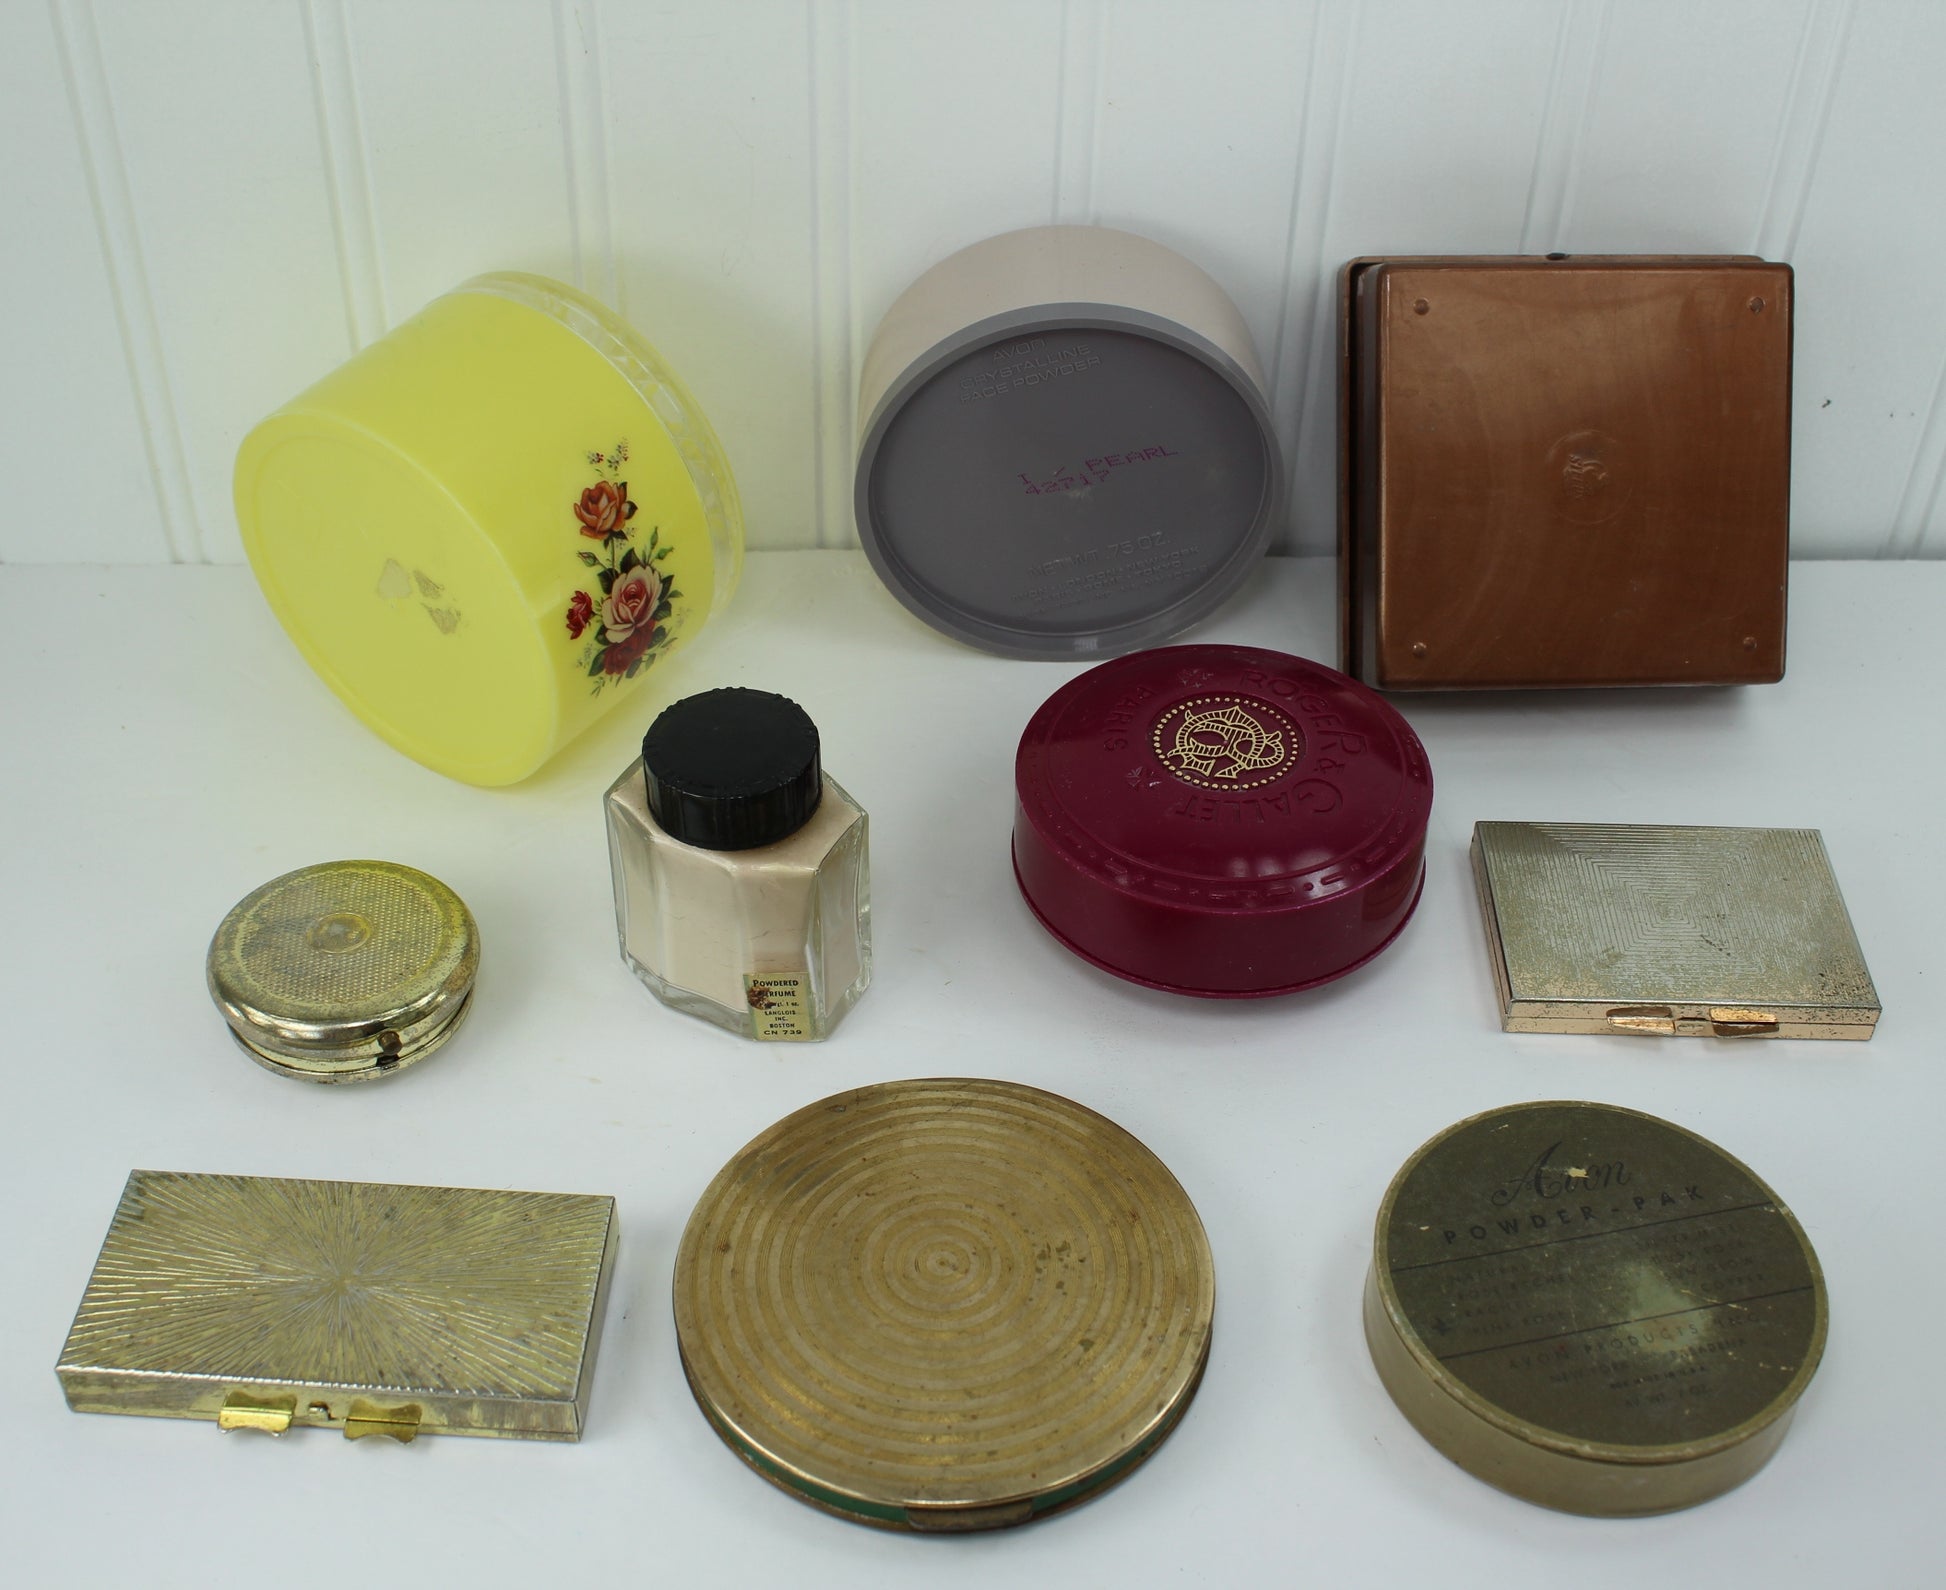 Collection Vintage 10 Vanity Compact Powder Jars Pill Boxes Mid Century & 1940s rogers gallet